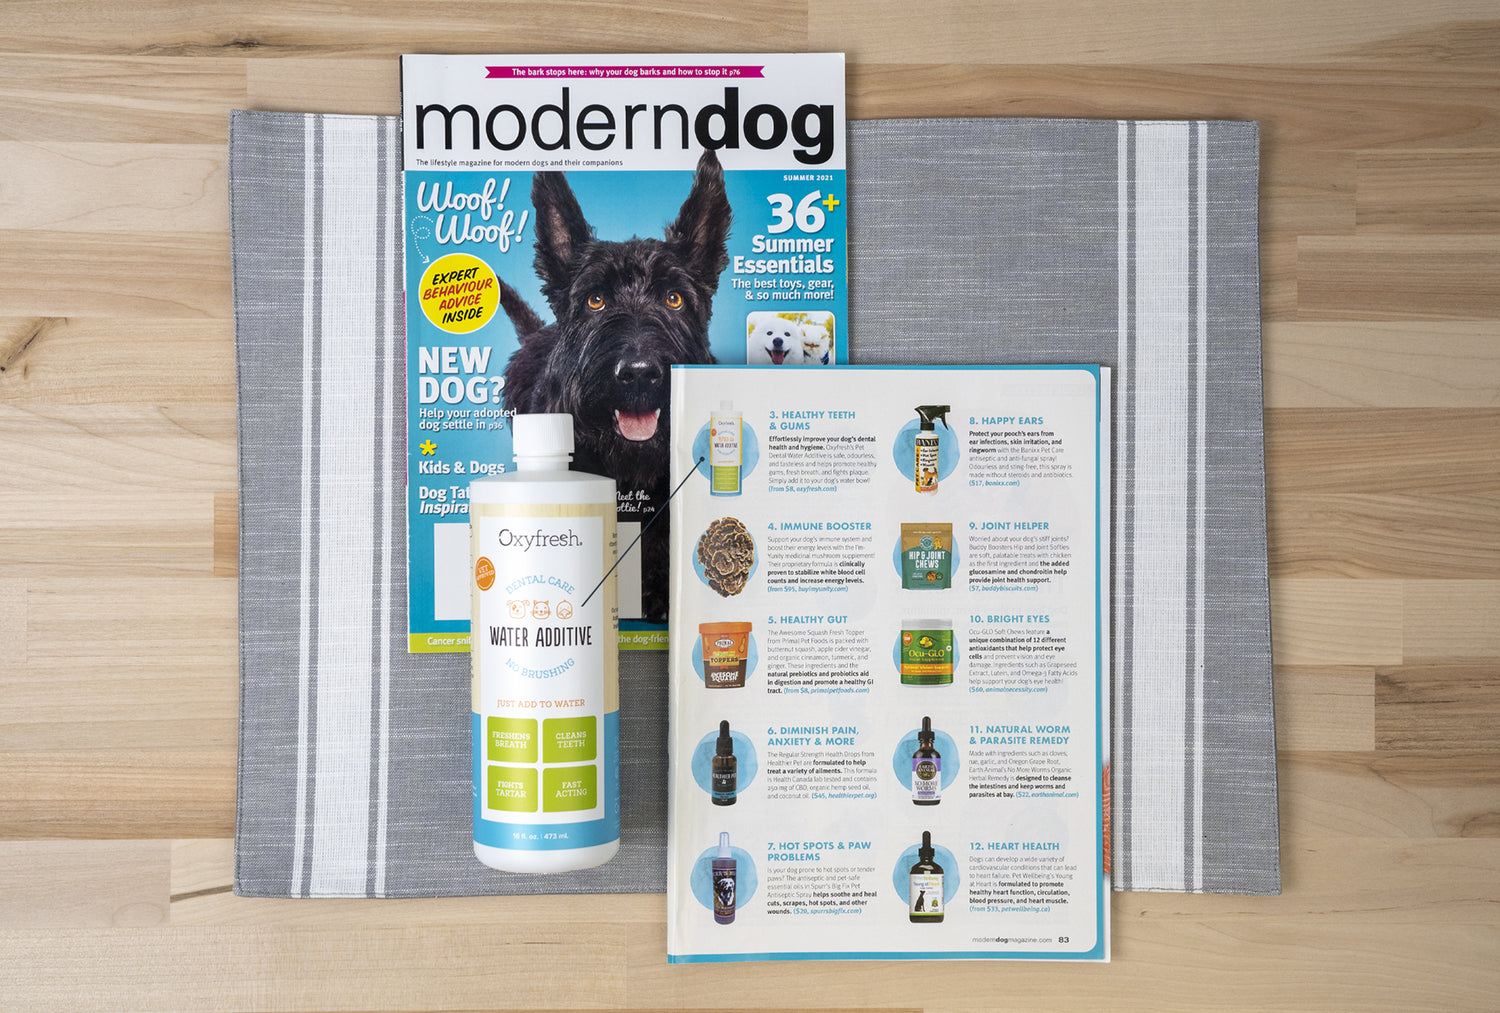 oxyfresh pet water additive next to article in Modern Dog magazine